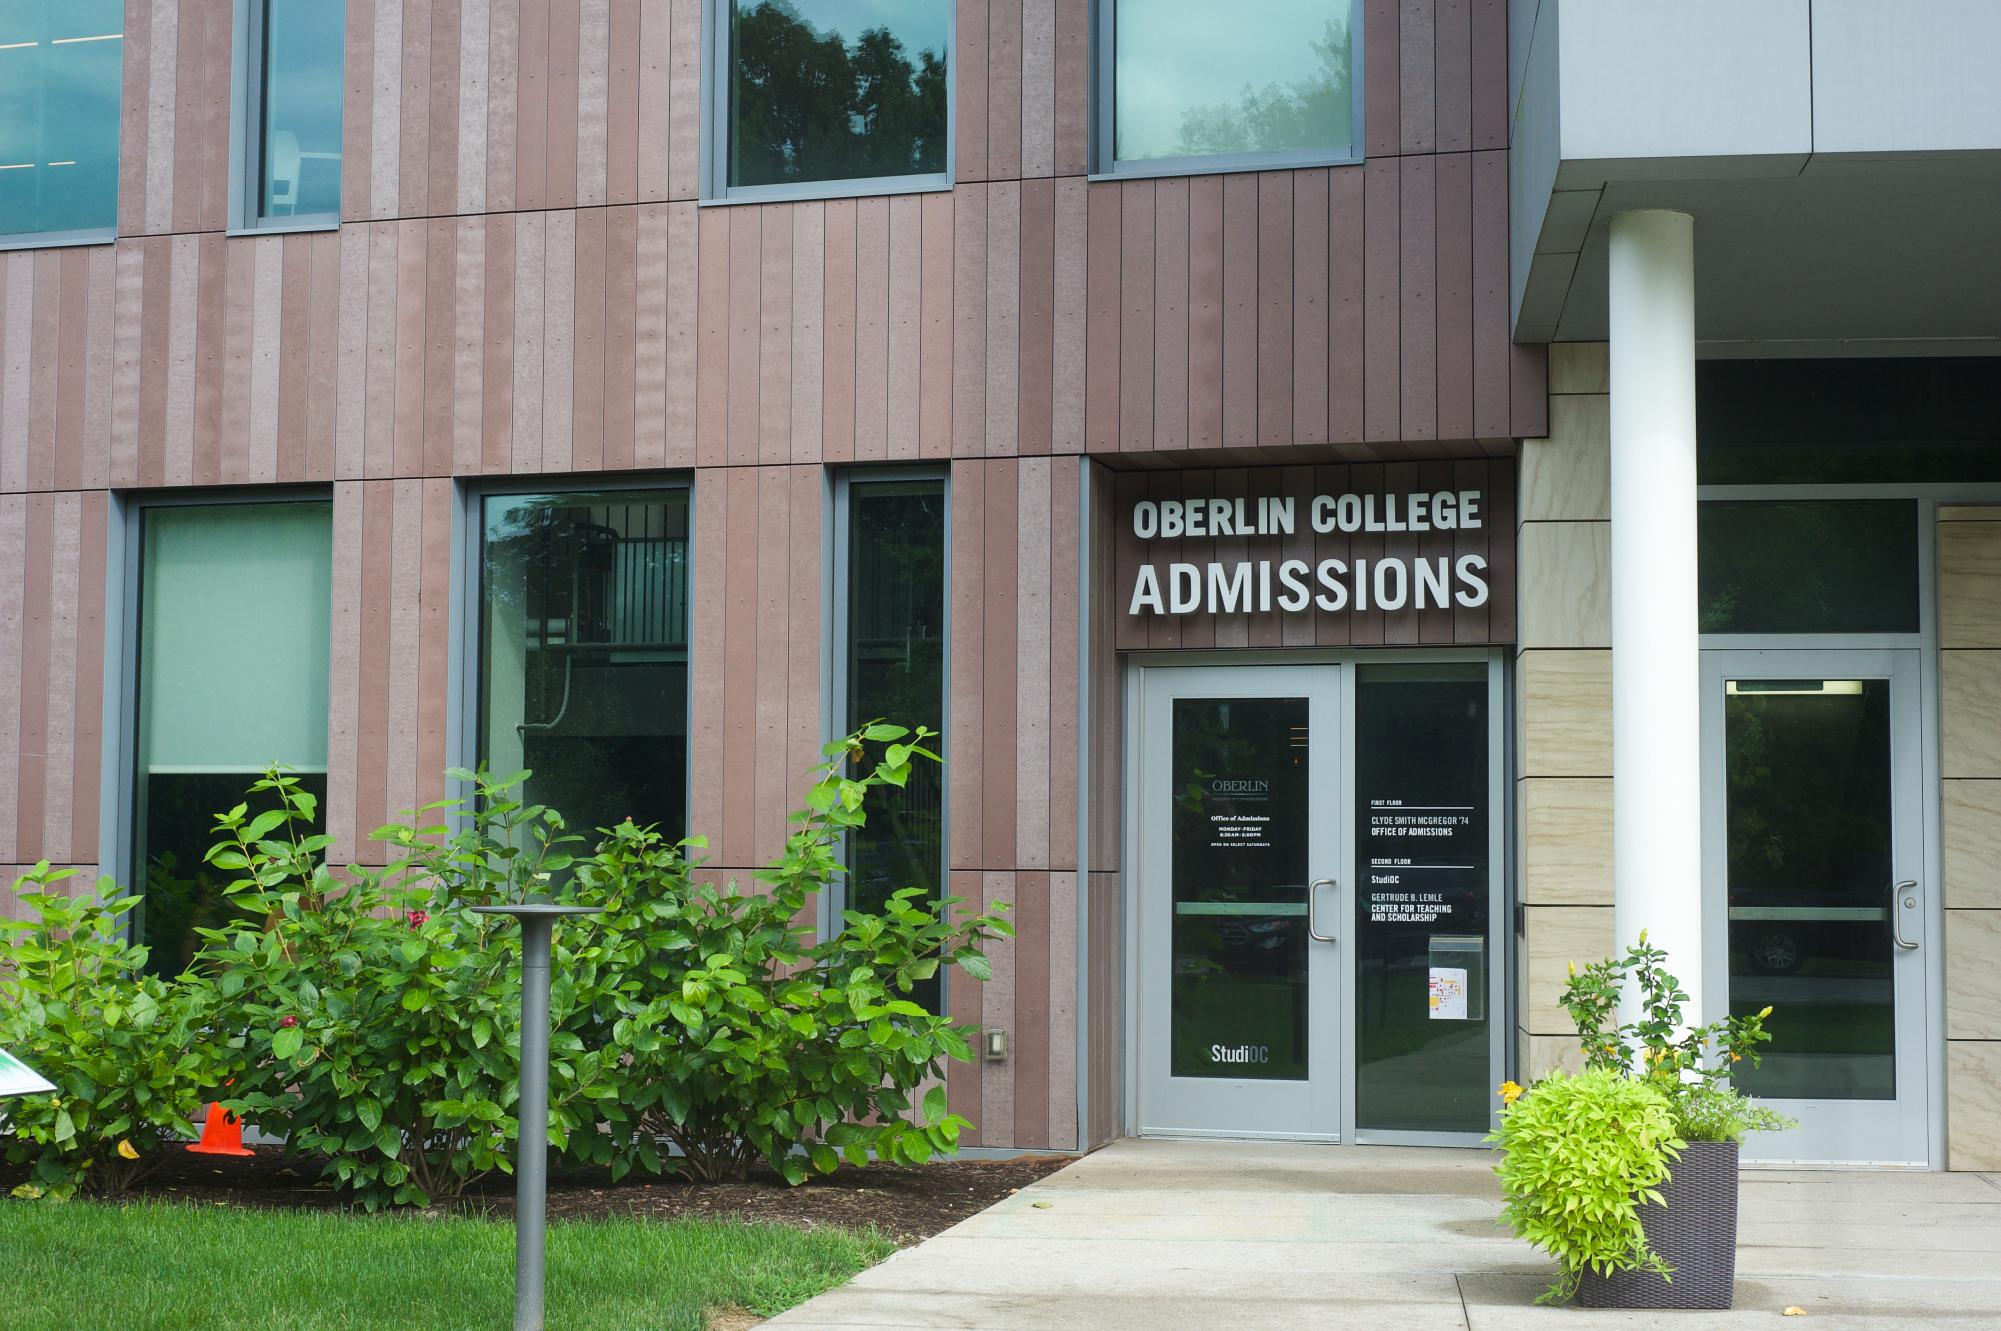 Following the June 29 Supreme Court decision ruling affirmative action unconstitutional, Oberlin College released a statement promising that racial equity would still be at the forefront of Oberlin’s mission.